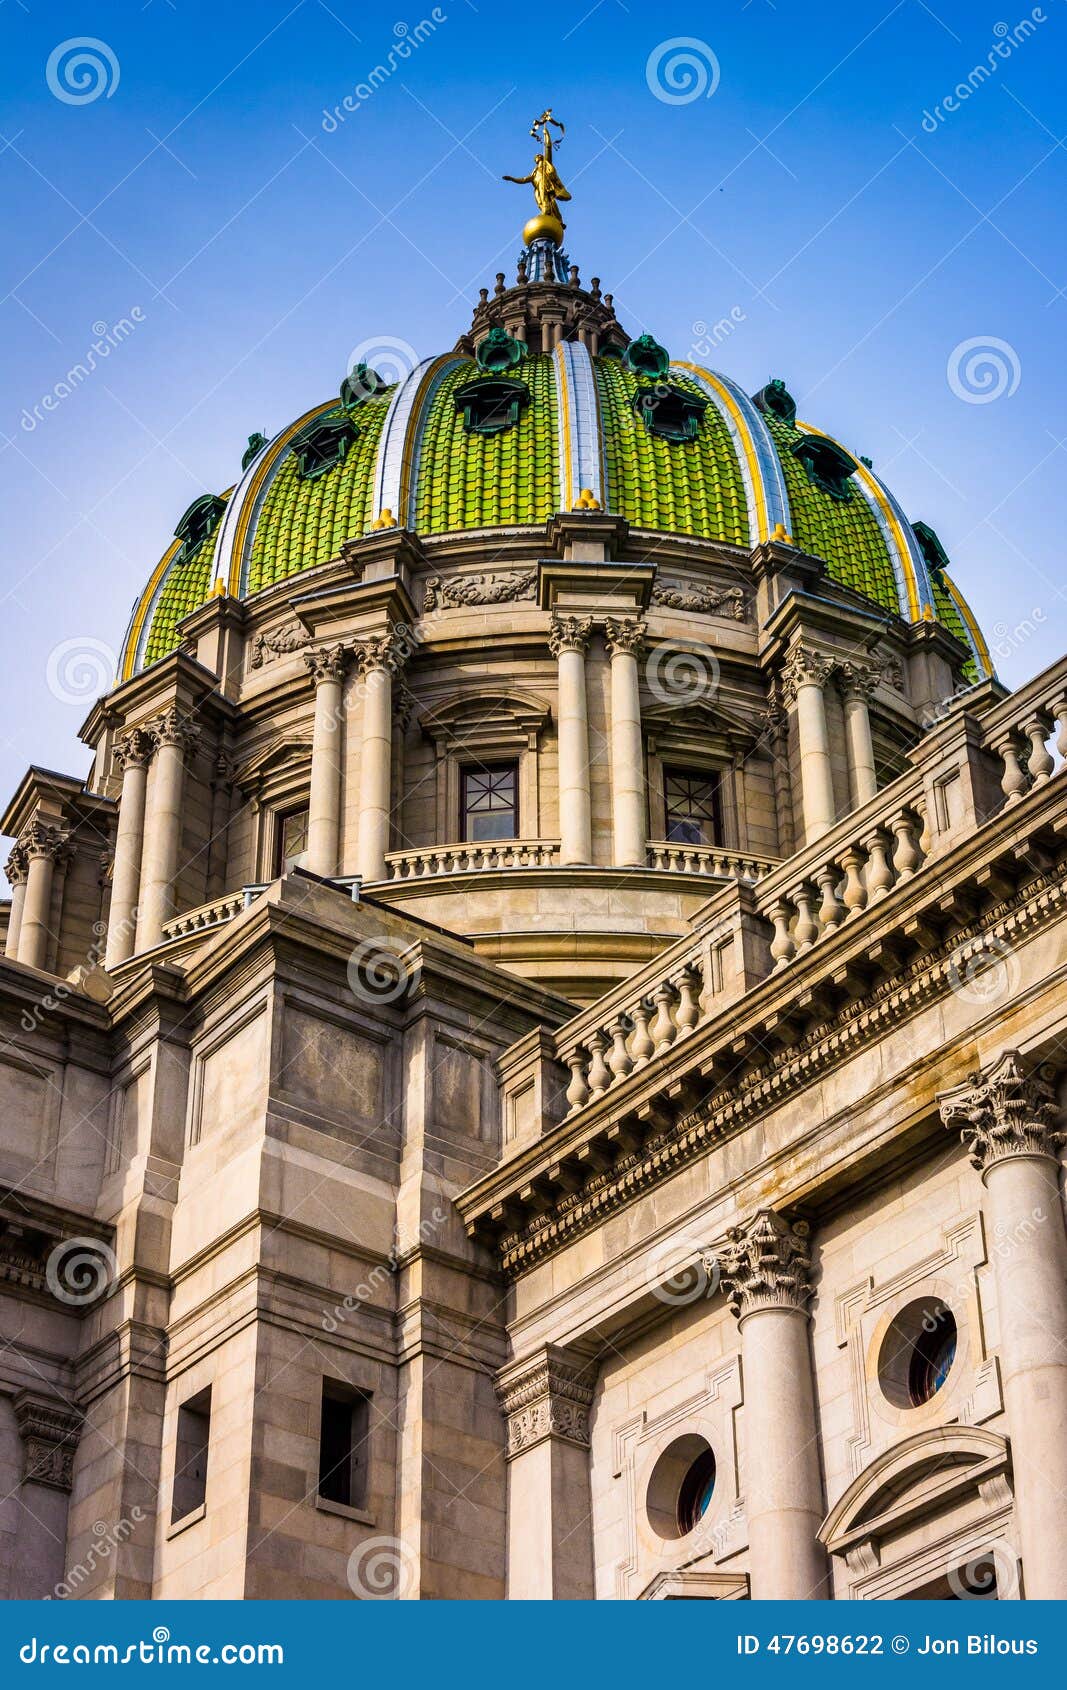 the dome of the pennsylvania state capitol in harrisburg, pennsylvania.